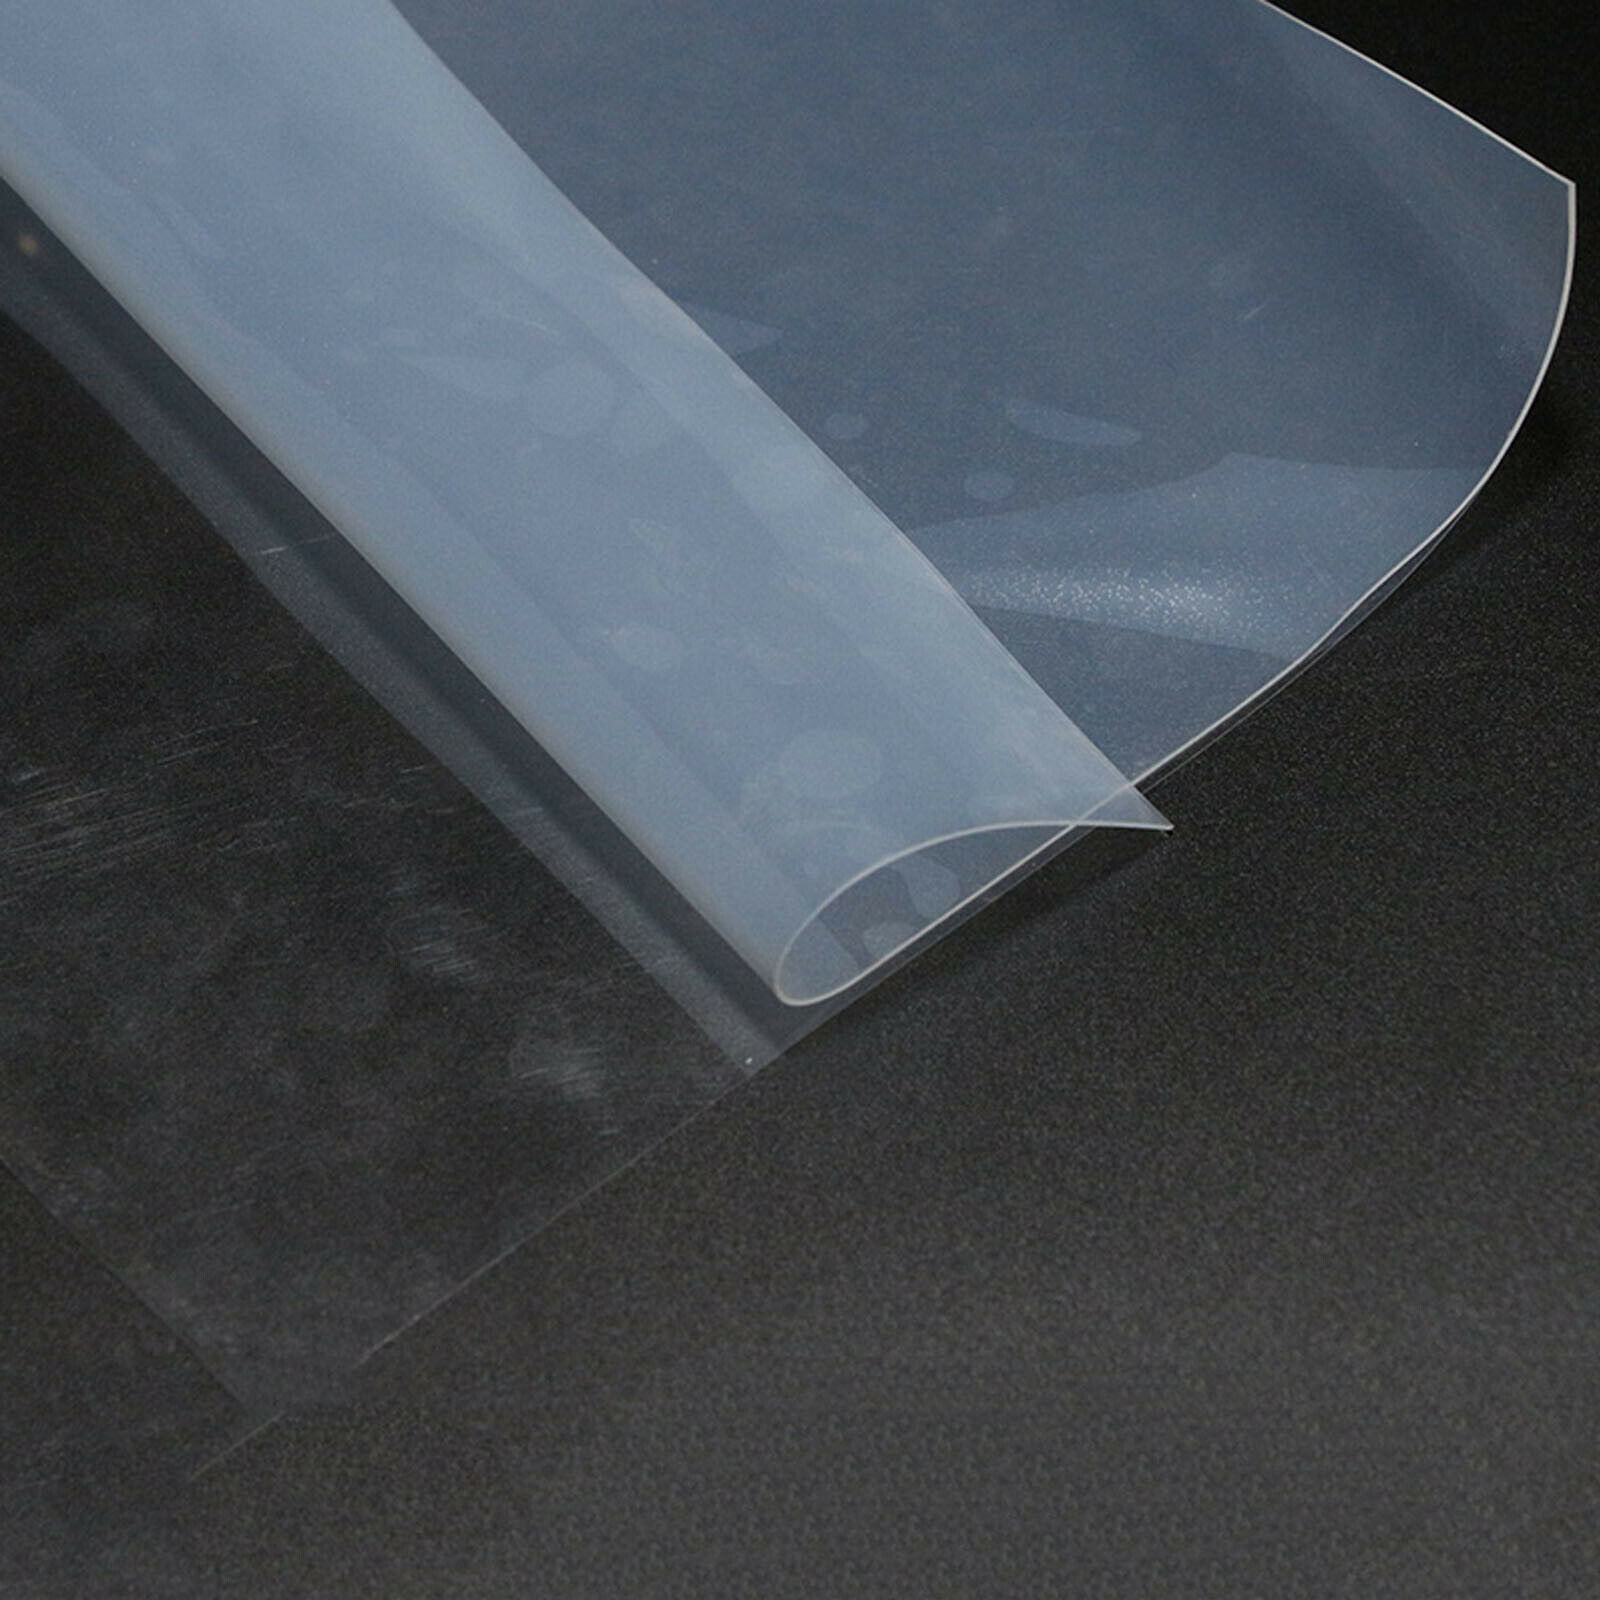 Silicone Rubber Sheet 20x20 Ultra Thin Silicon Film Panel 0.1mm-1mm thick